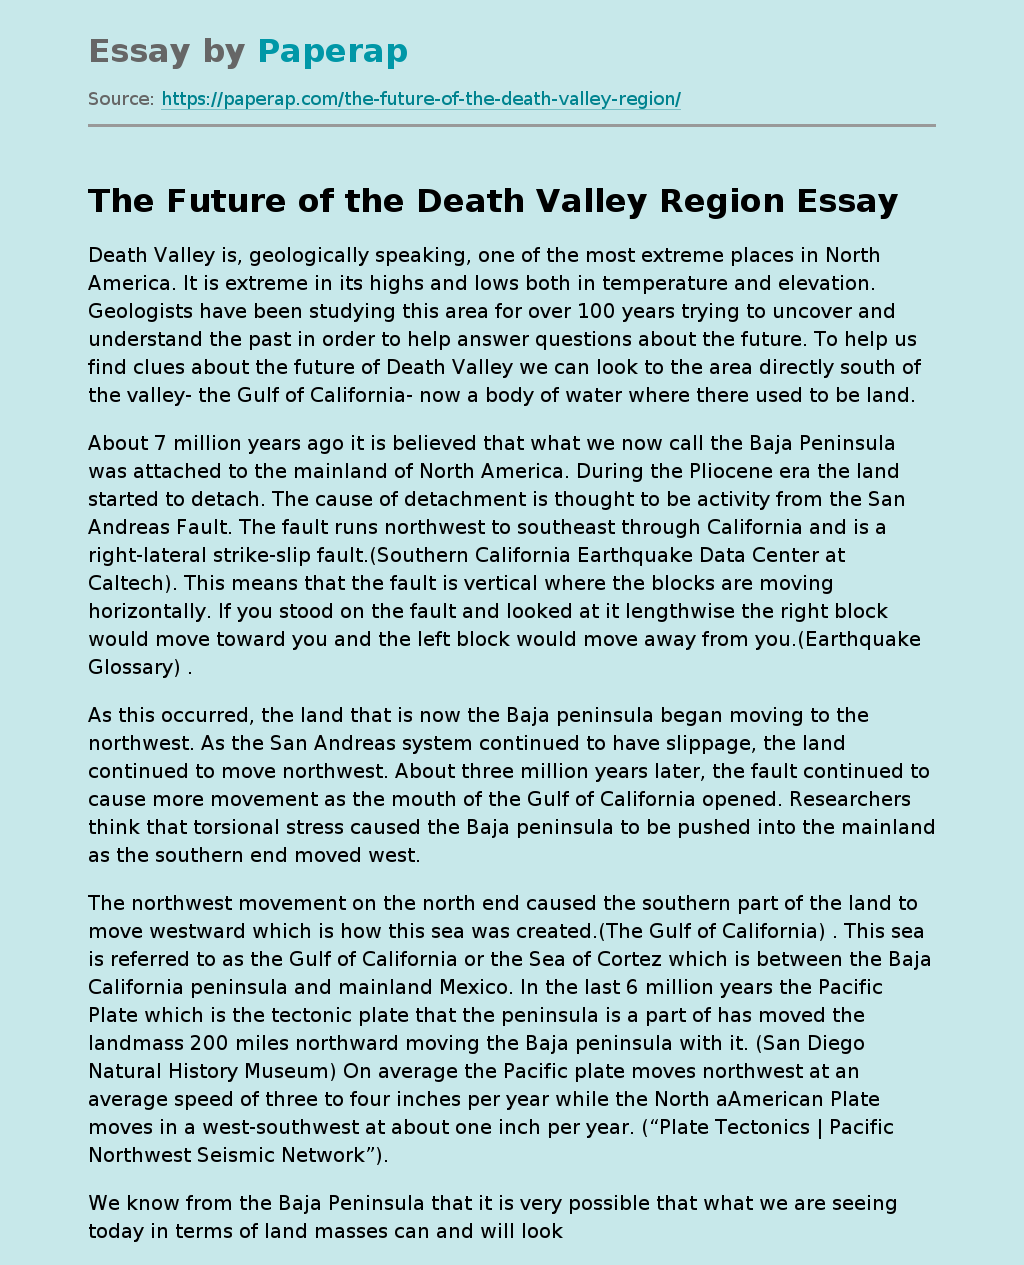 The Future of the Death Valley Region